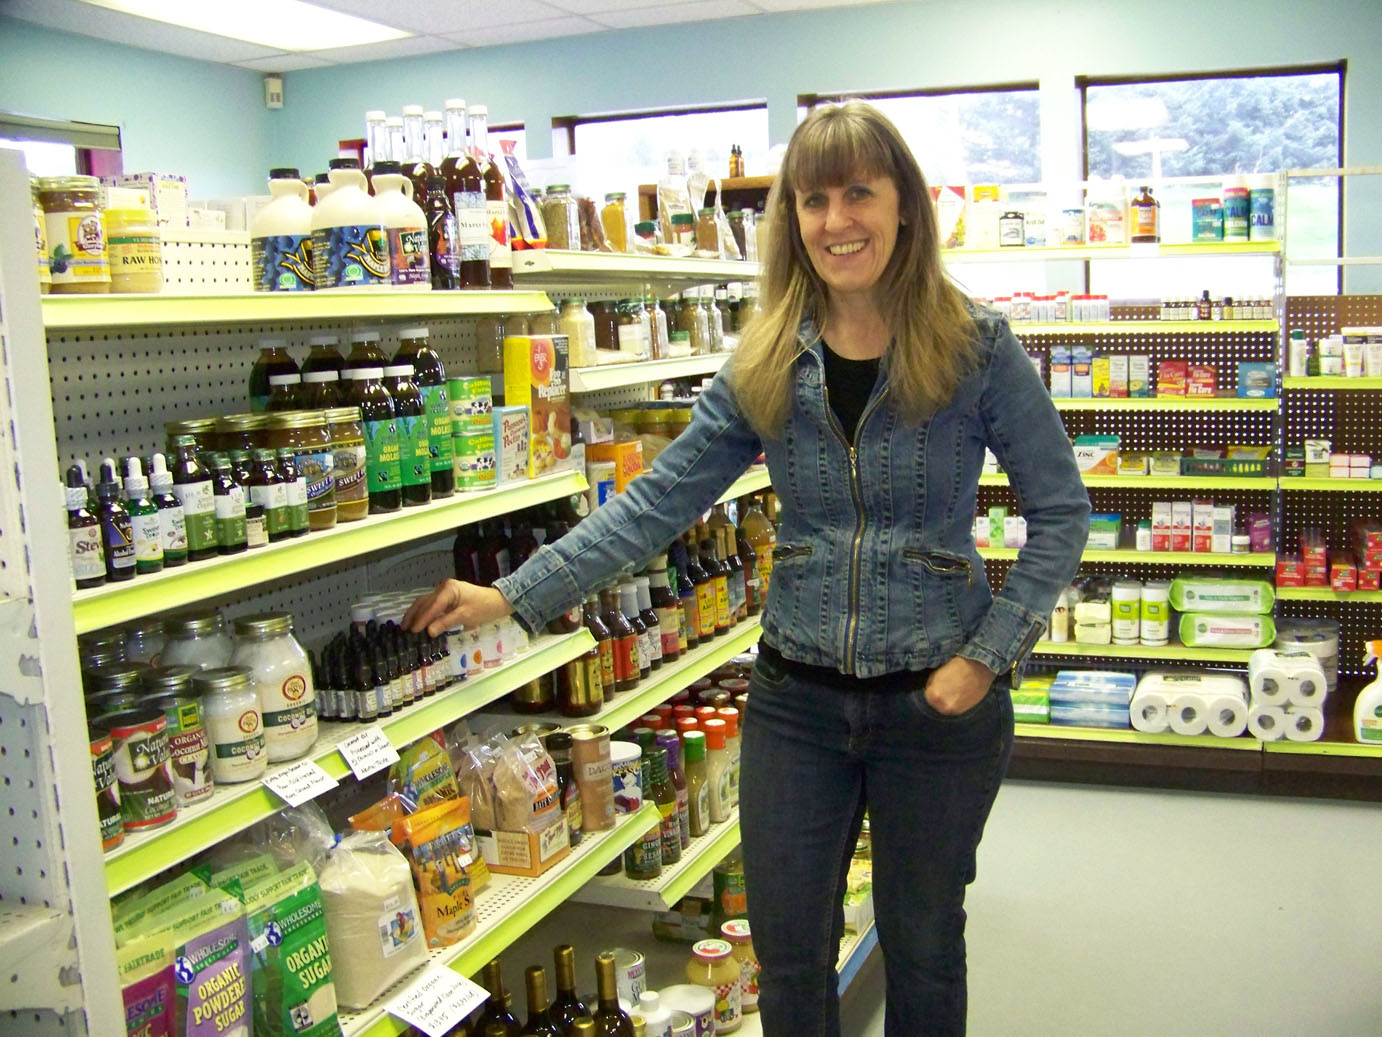 Tara Kain points out some of the inventory of her store, Anchor Point Natural Foods, now located at 345 Sterling Highway, Suite 105, next to Enstar’s office.-Photo by McKibben Jackinsky, Homer News